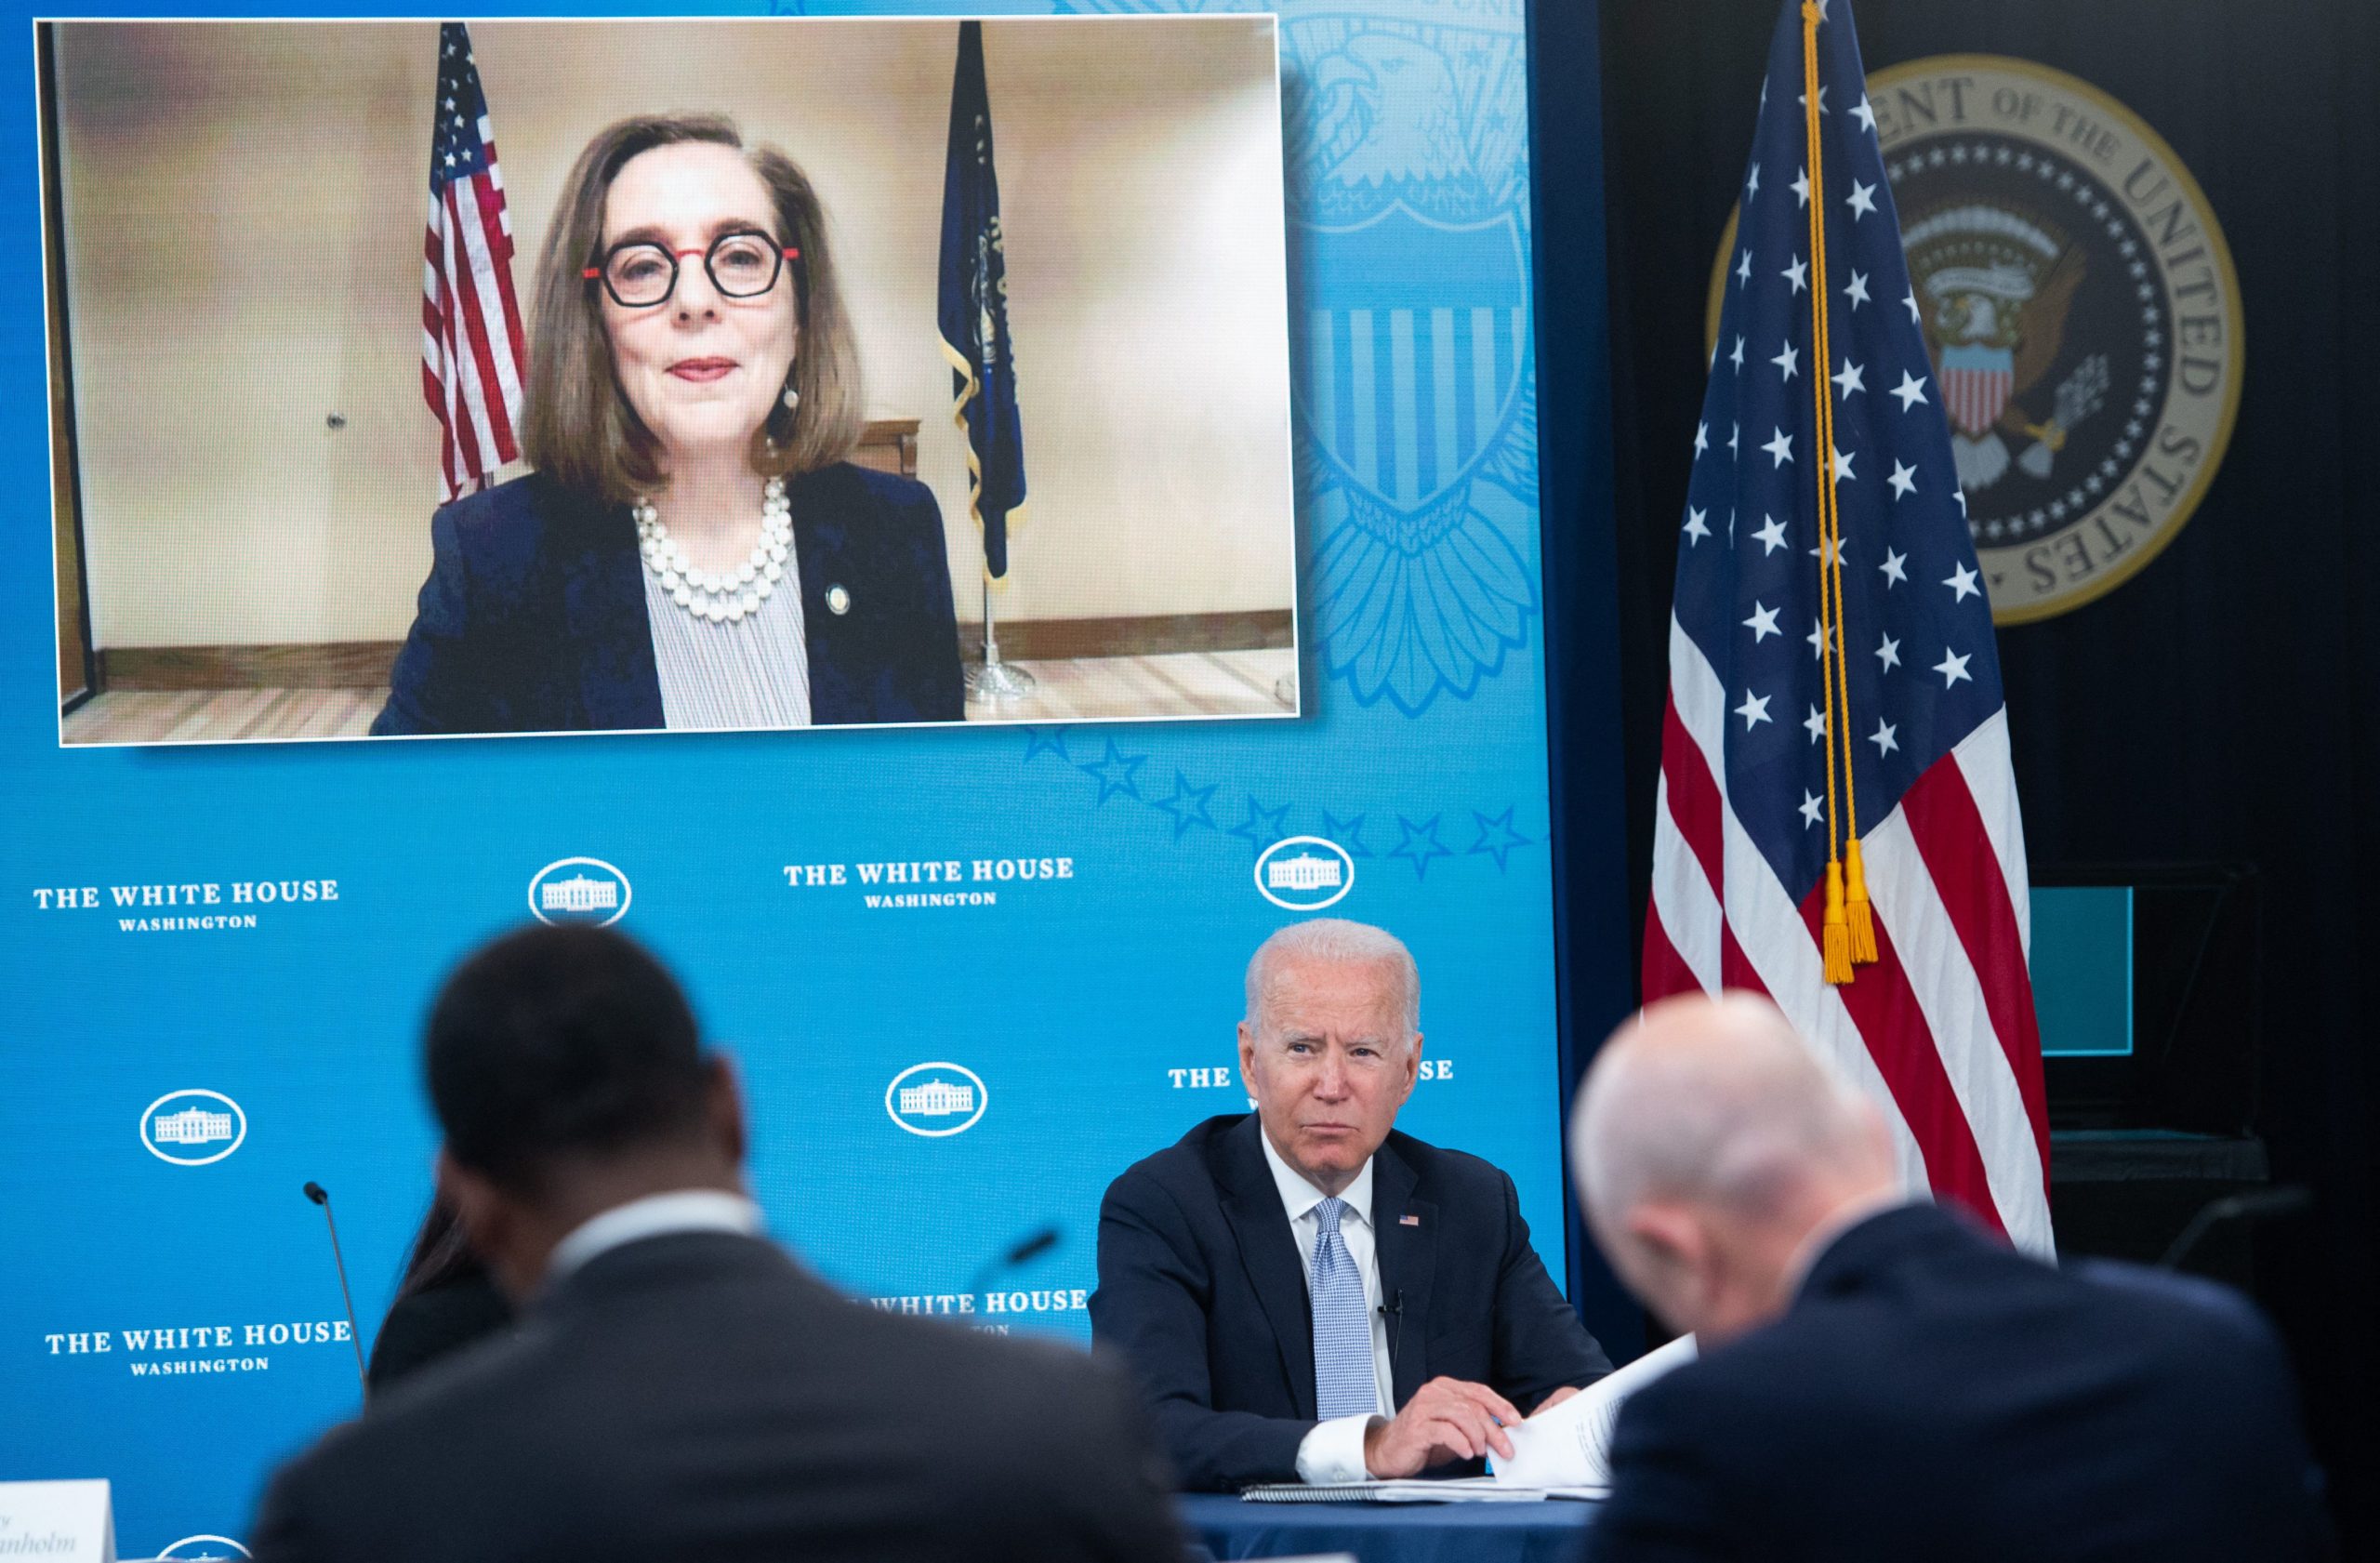 President Joe Biden holds a briefing with cabinet members and government officials as Oregon Gov. Kate Brown looks on June 30, 2021. (Saul Loeb/AFP via Getty Images)